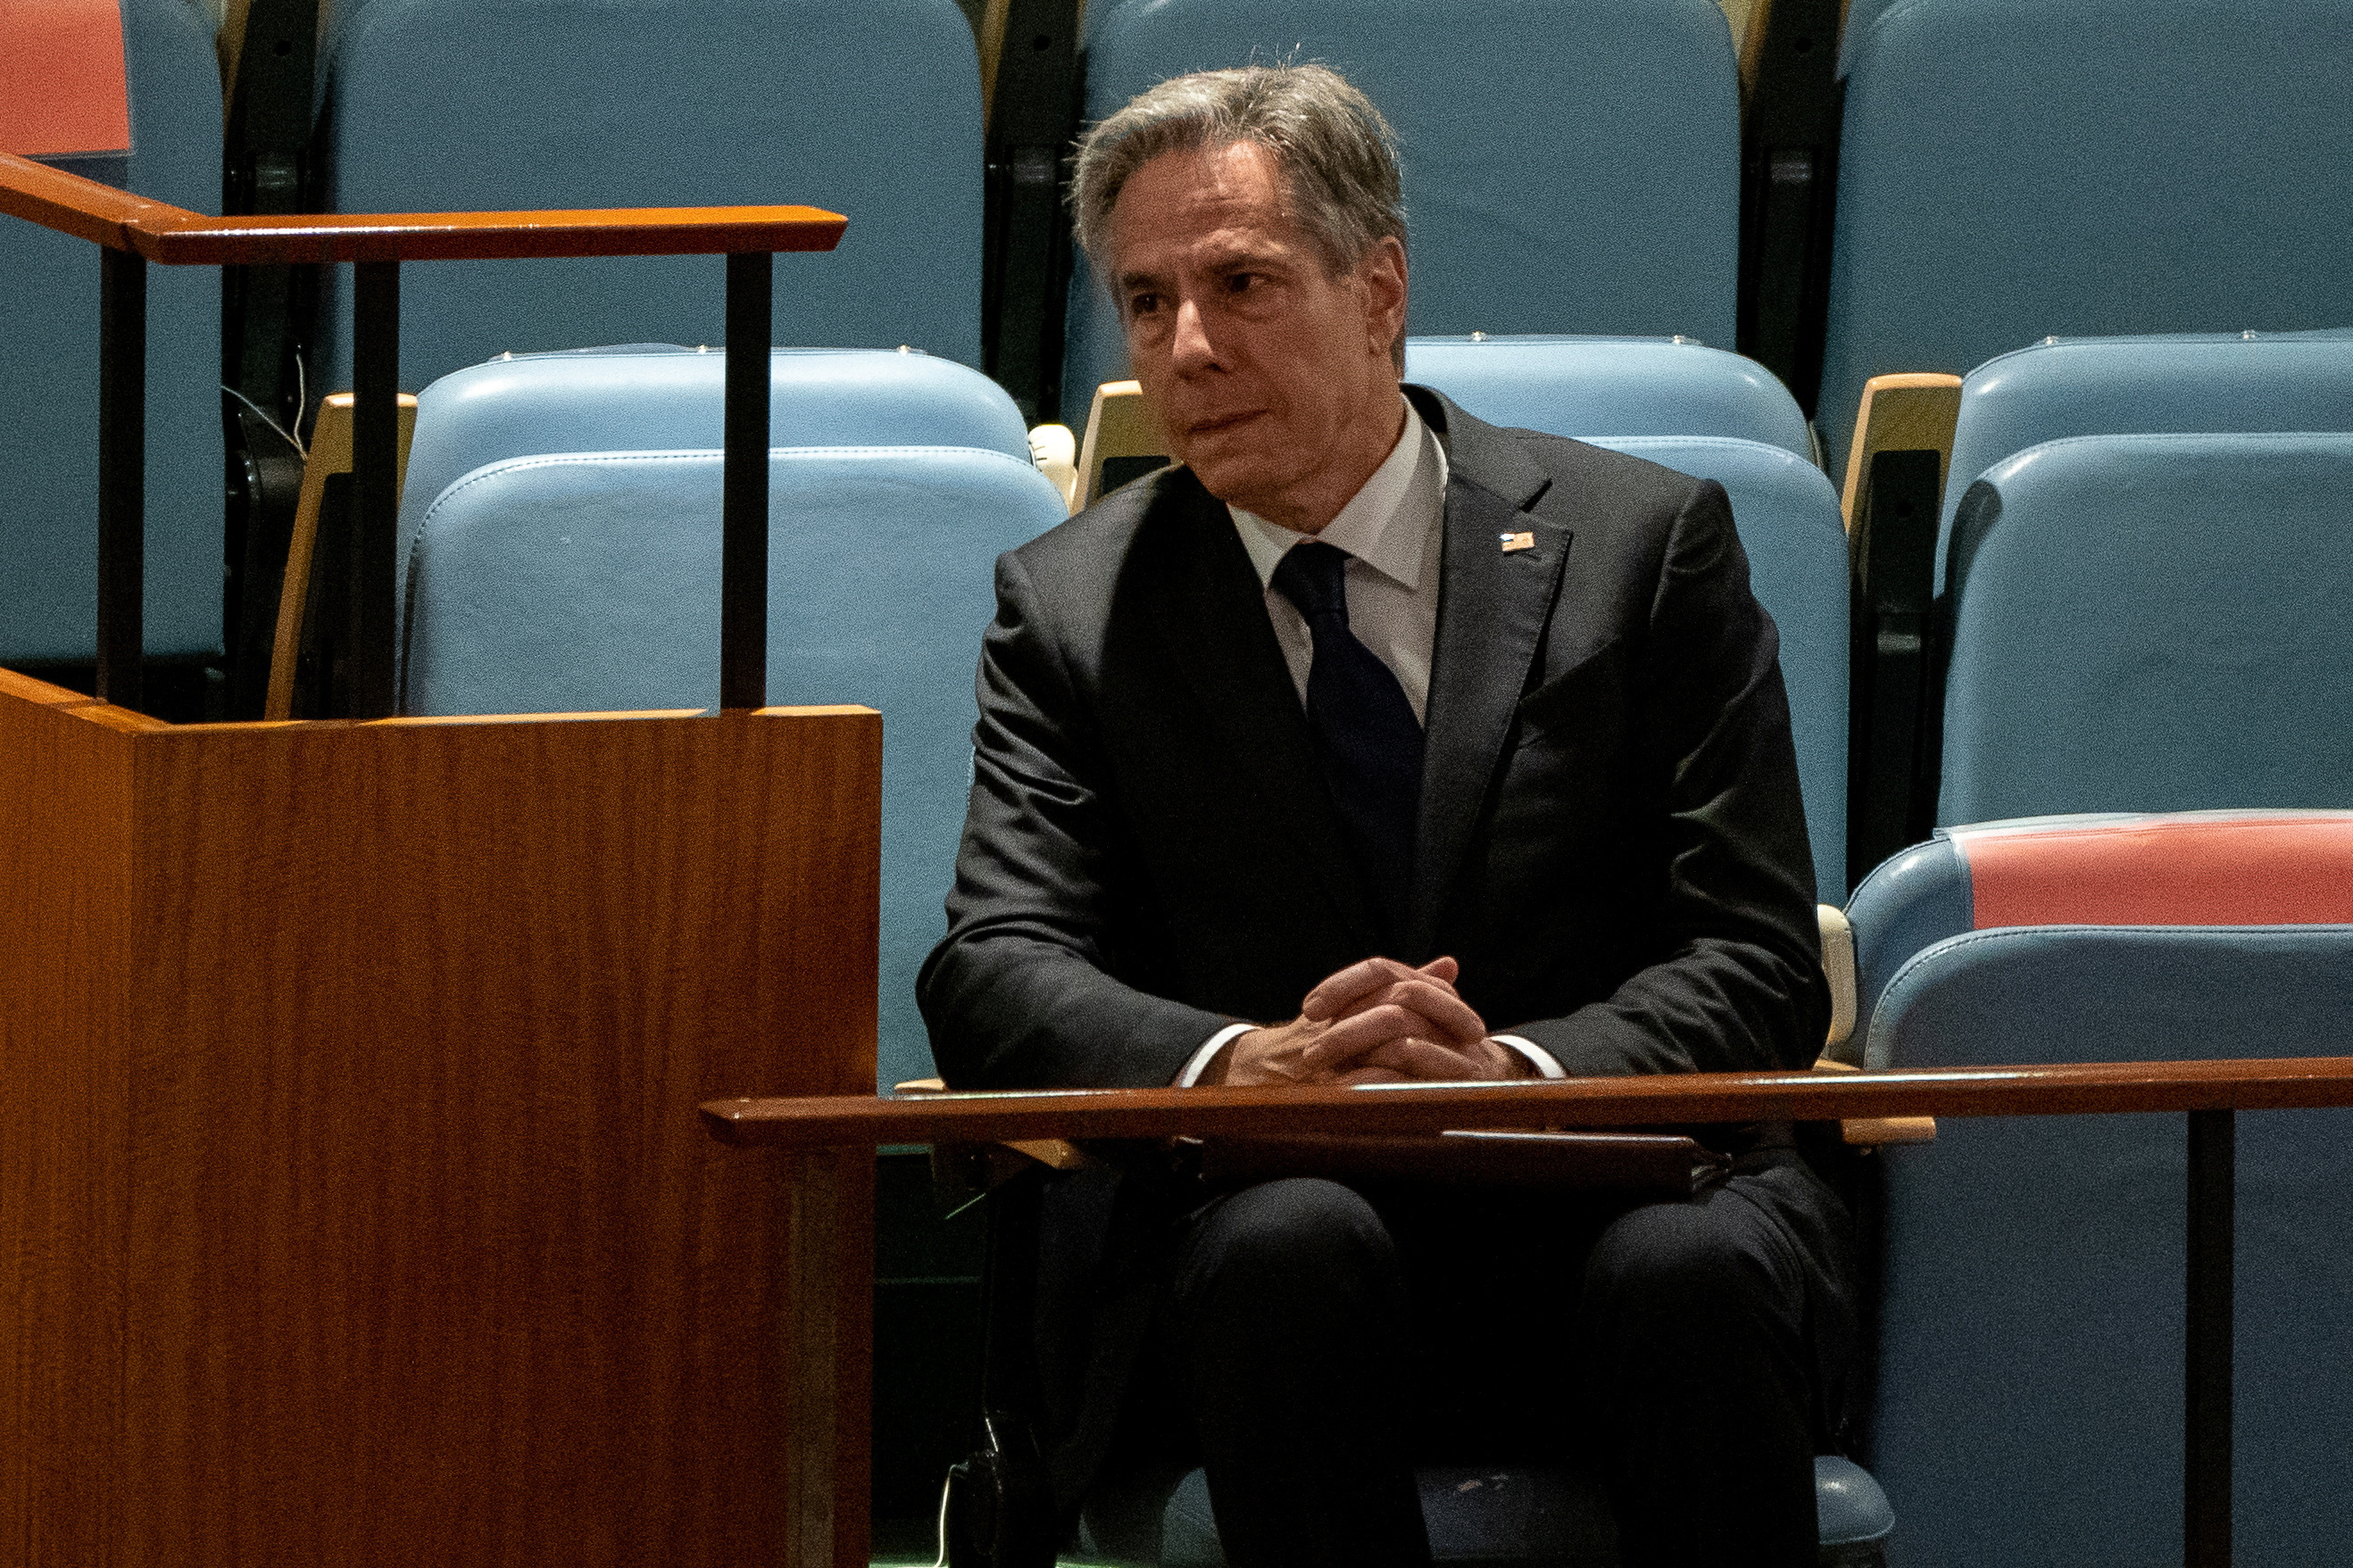 U.S. Secretary of State Antony Blinken Sits On the Sidelines Prior to His Address to the United Nations General Assembly During the Nuclear Non-Proliferation Treaty Review Conference in New York